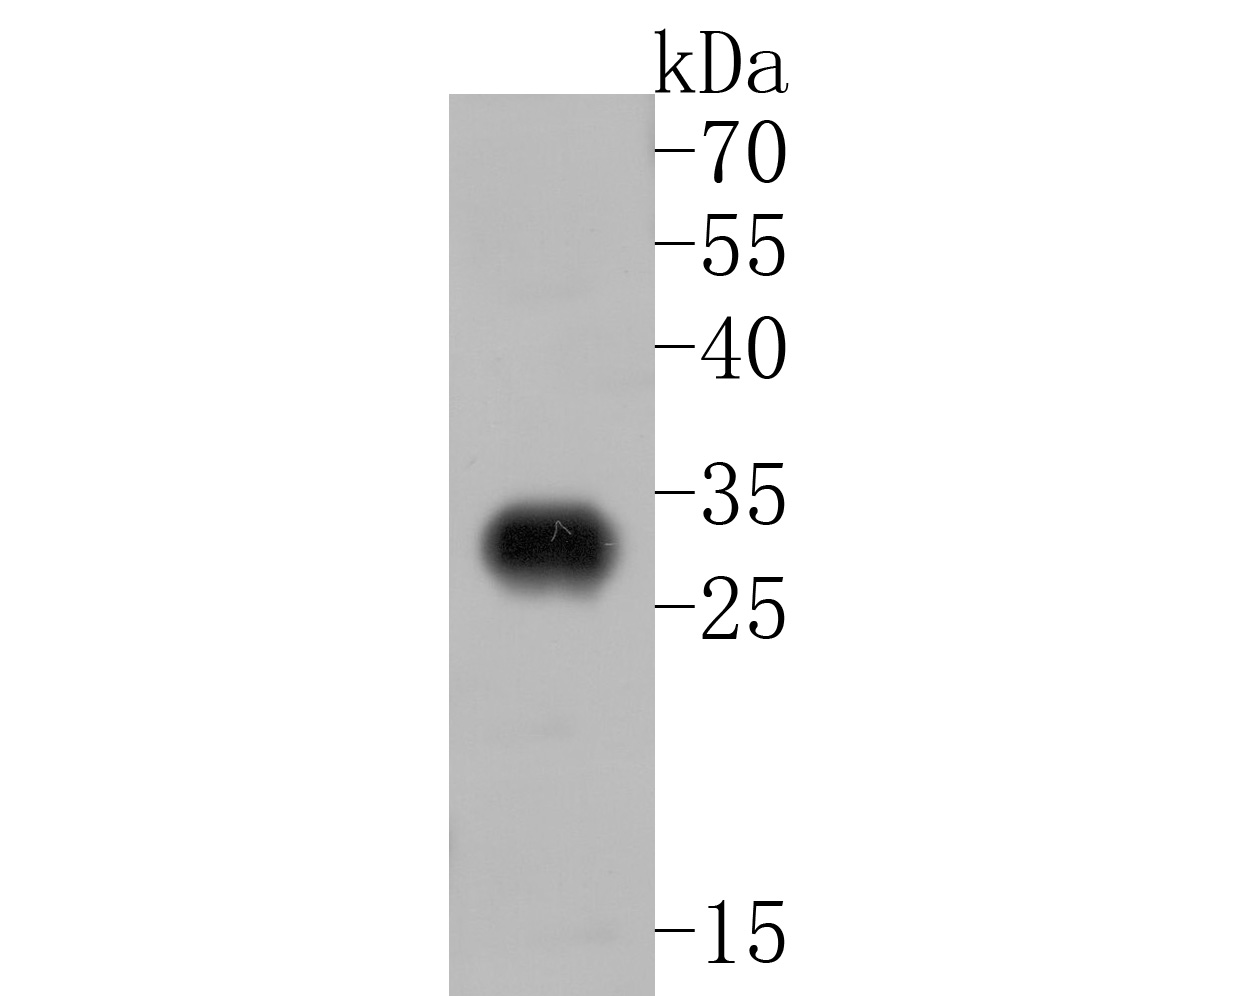 Western blot analysis of MRPL28 on zebrafish tissue lysates. Proteins were transferred to a PVDF membrane and blocked with 5% BSA in PBS for 1 hour at room temperature. The primary antibody (ET7111-30, 1/500) was used in 5% BSA at room temperature for 2 hours. Goat Anti-Rabbit IgG - HRP Secondary Antibody (HA1001) at 1:5,000 dilution was used for 1 hour at room temperature.